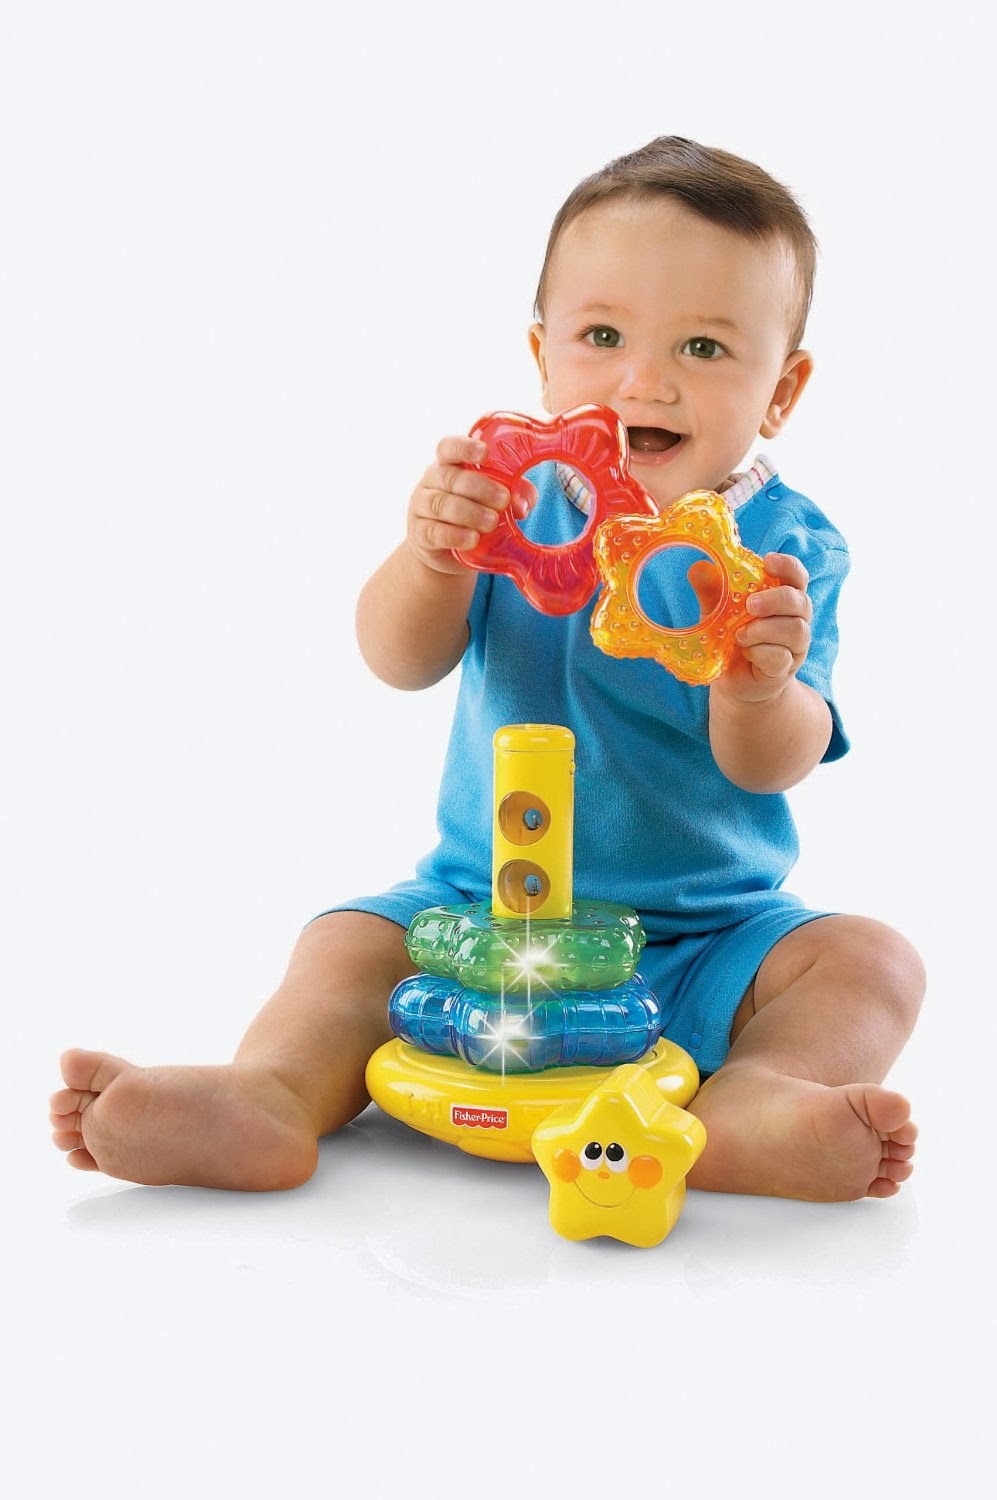 My Baby: 10 Best Toys for Your Baby : 6 - 12 months old